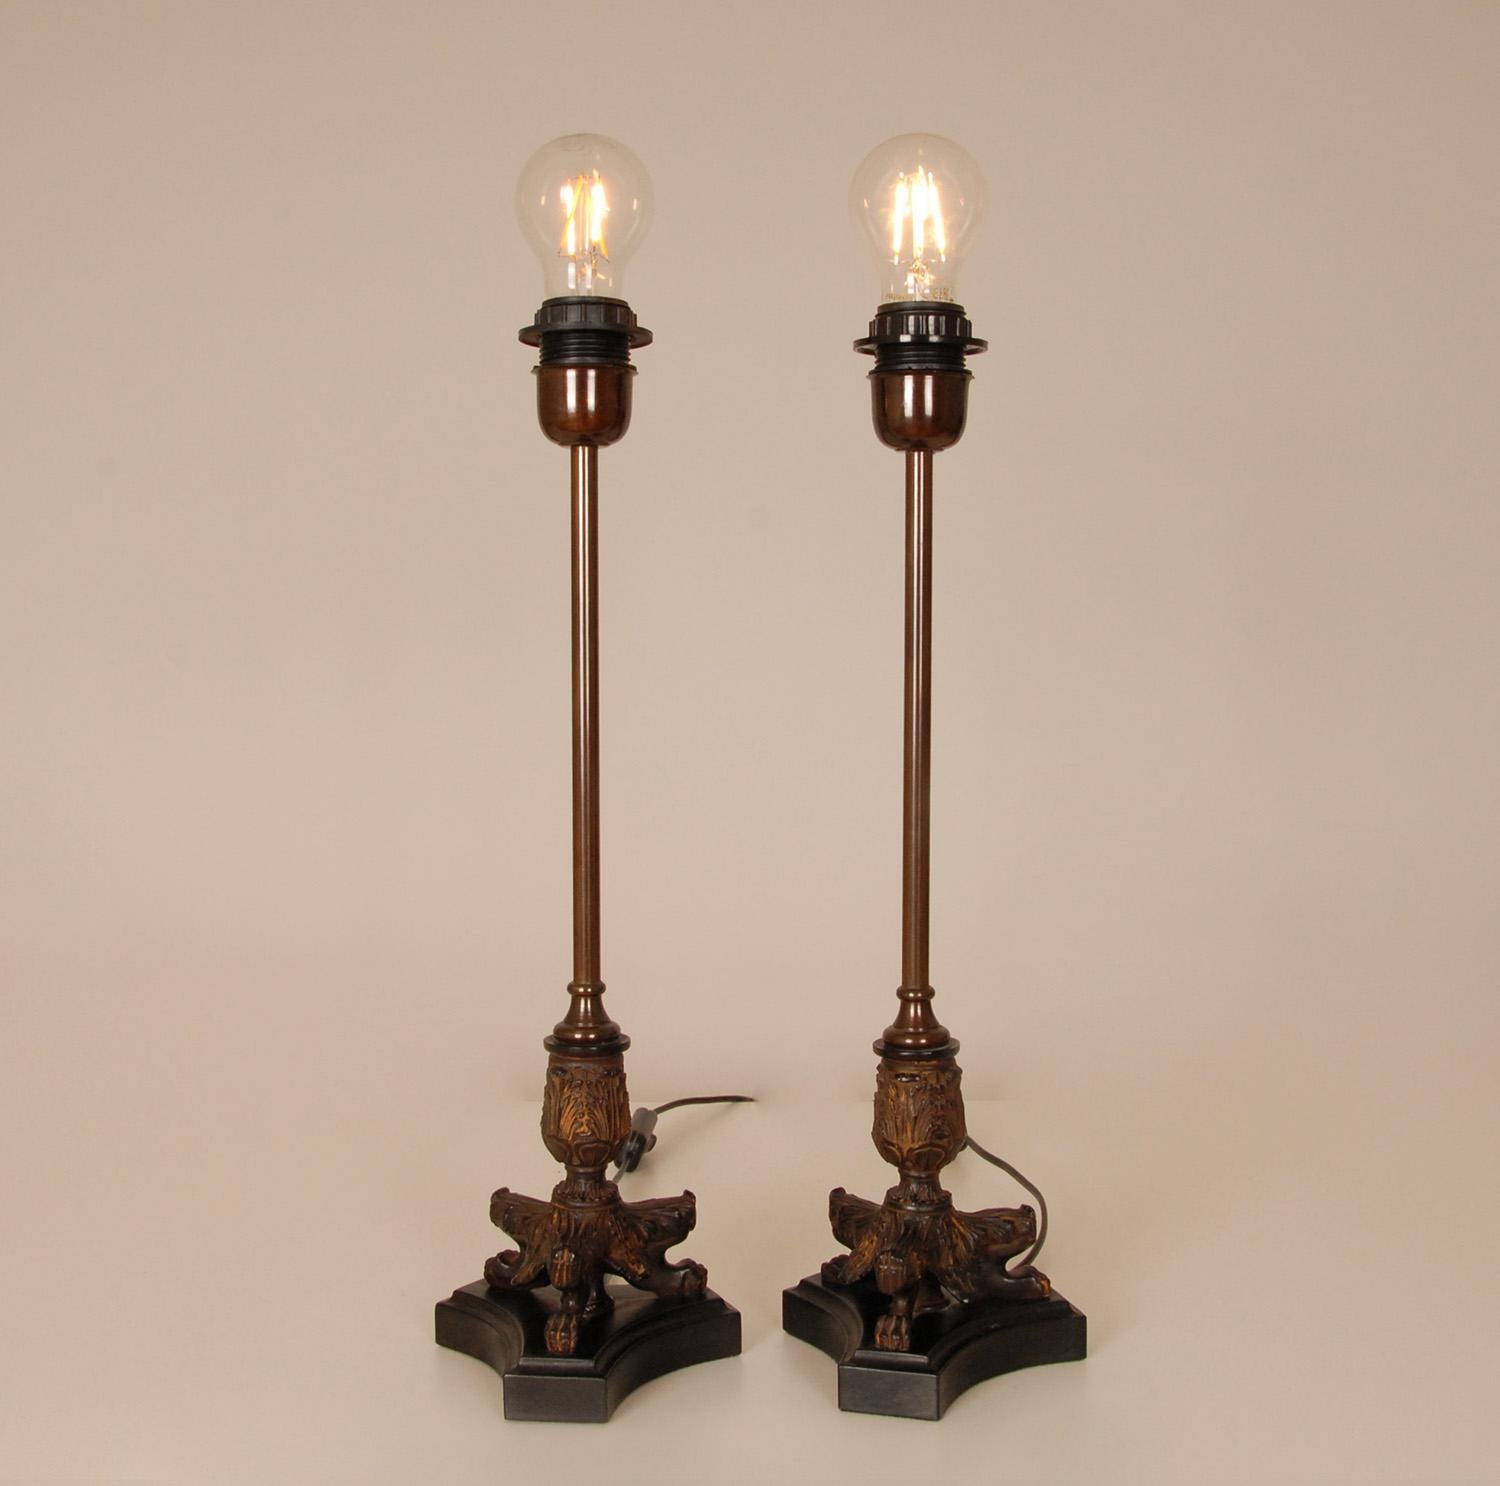 Vintage French Napoleonic Table Lamps Tripod Base Lion Paws Empire Lamps a Pair For Sale 2